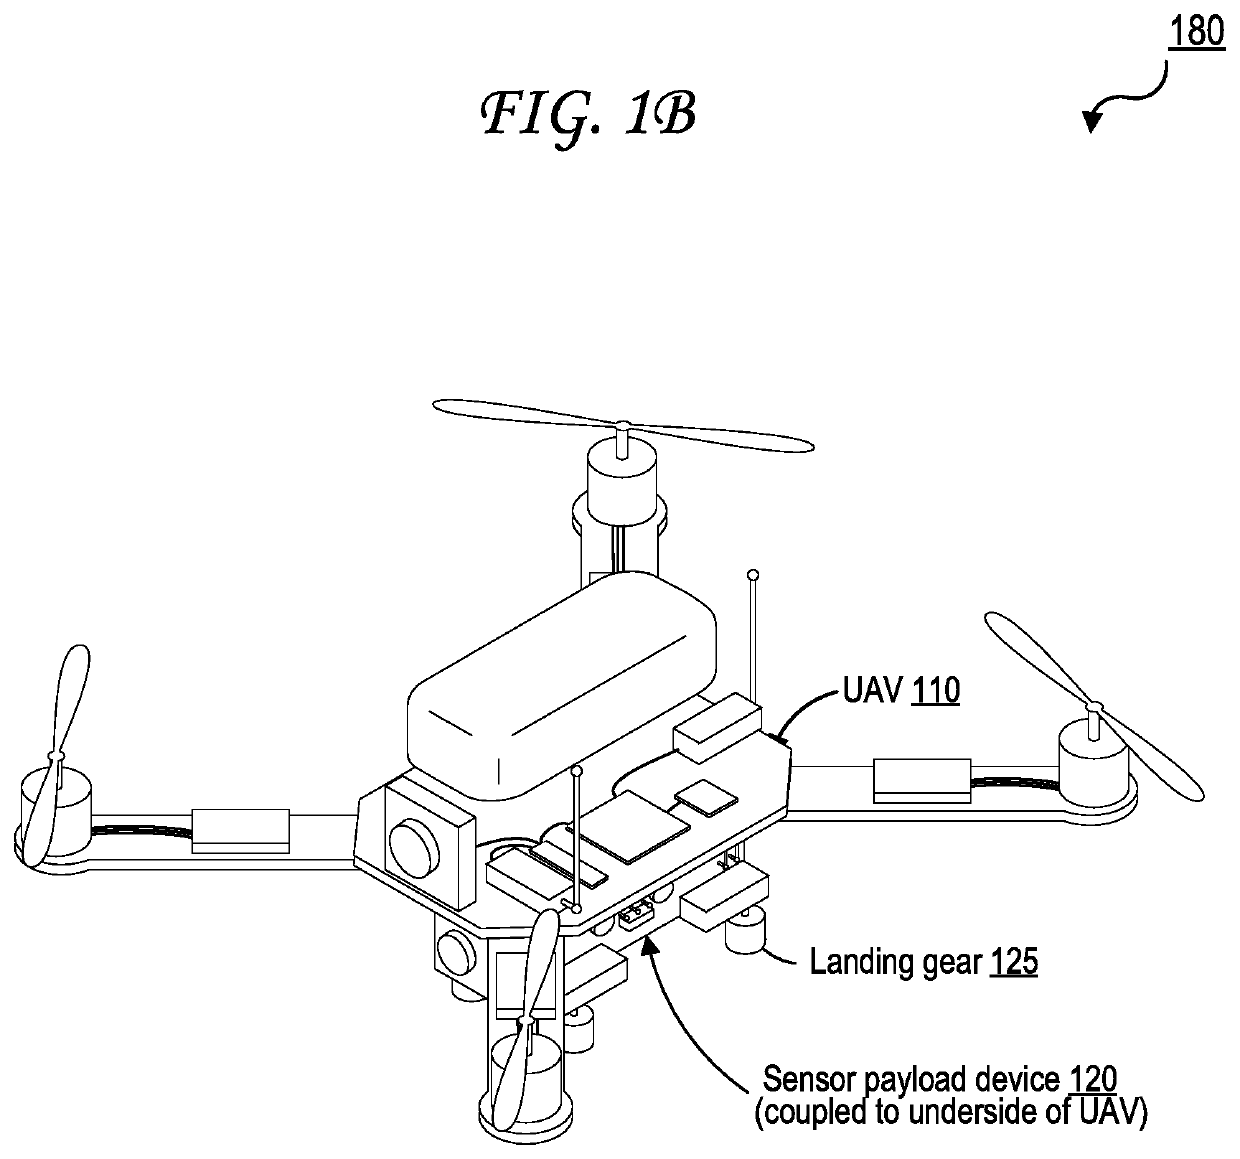 Removable sensor payload system for unmanned aerial vehicle performing media capture and property analysis